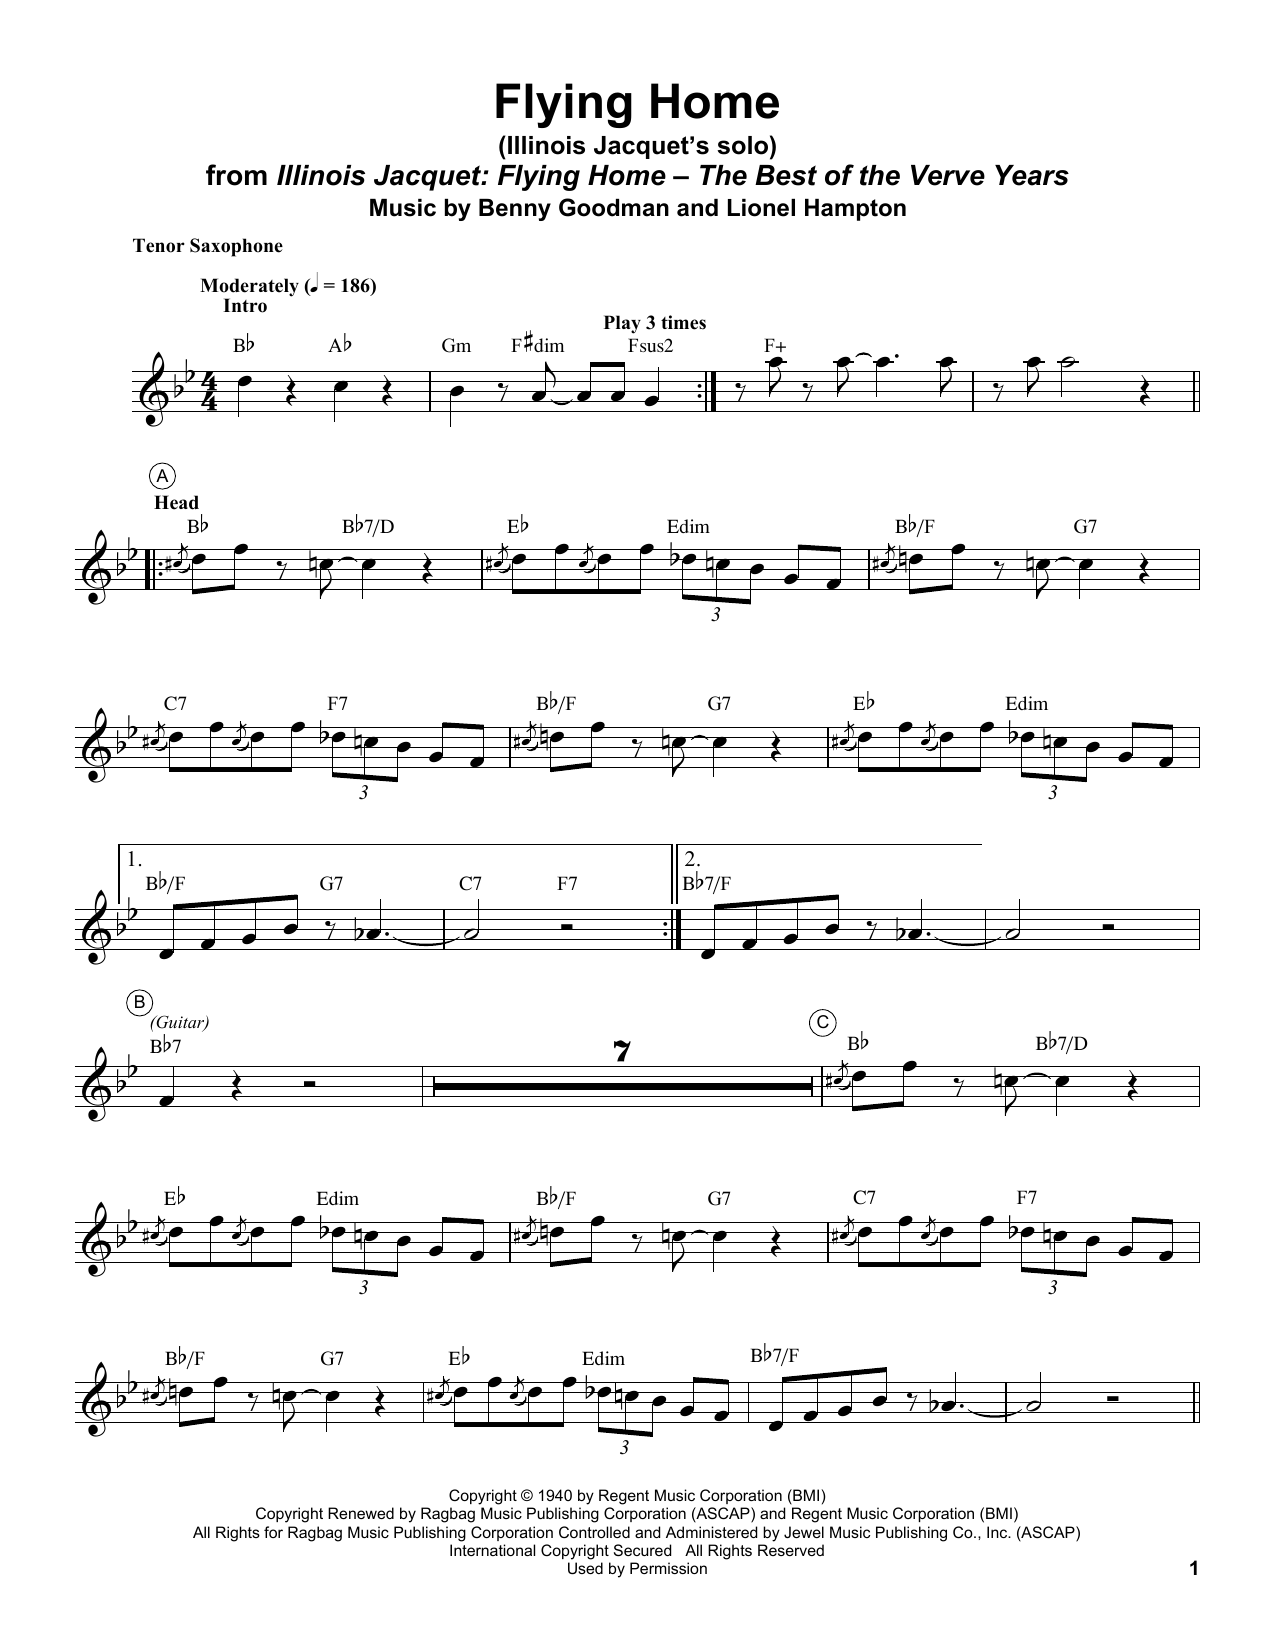 Download Illinois Jacquet Flying Home Sheet Music